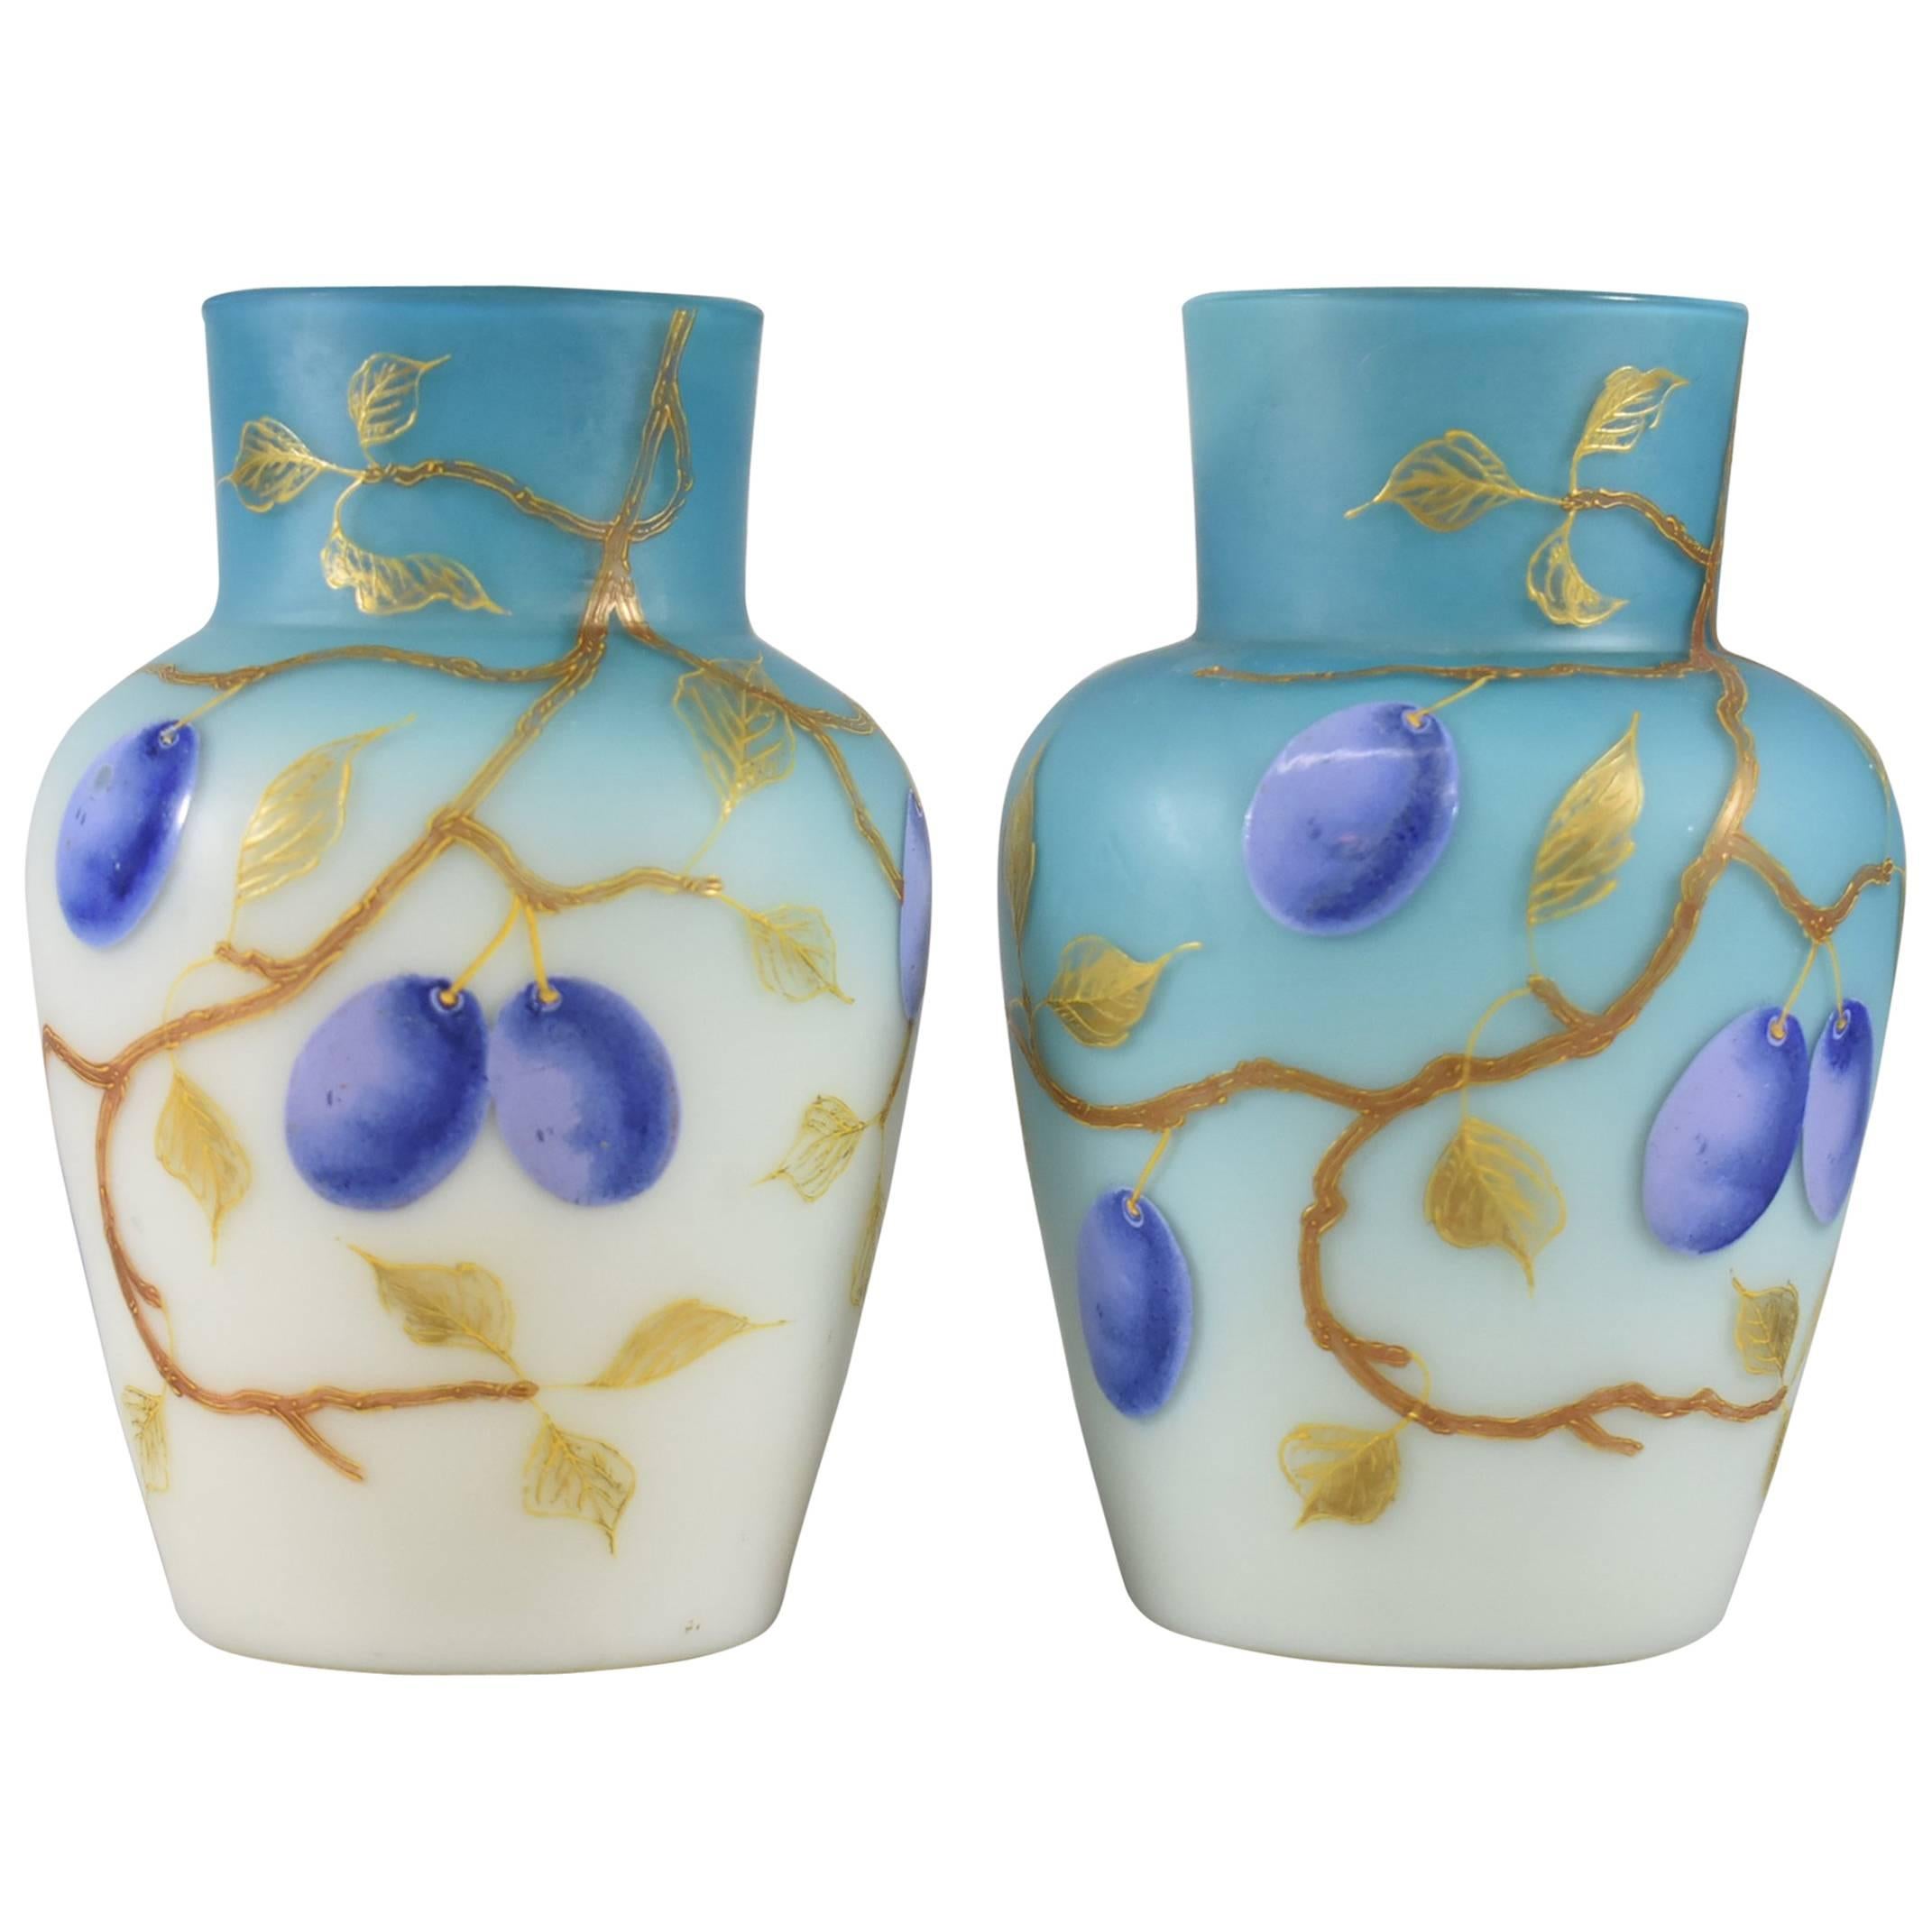 Pair of Blue Cased Glass Vases with Plums/Grapes by Thomas Webb